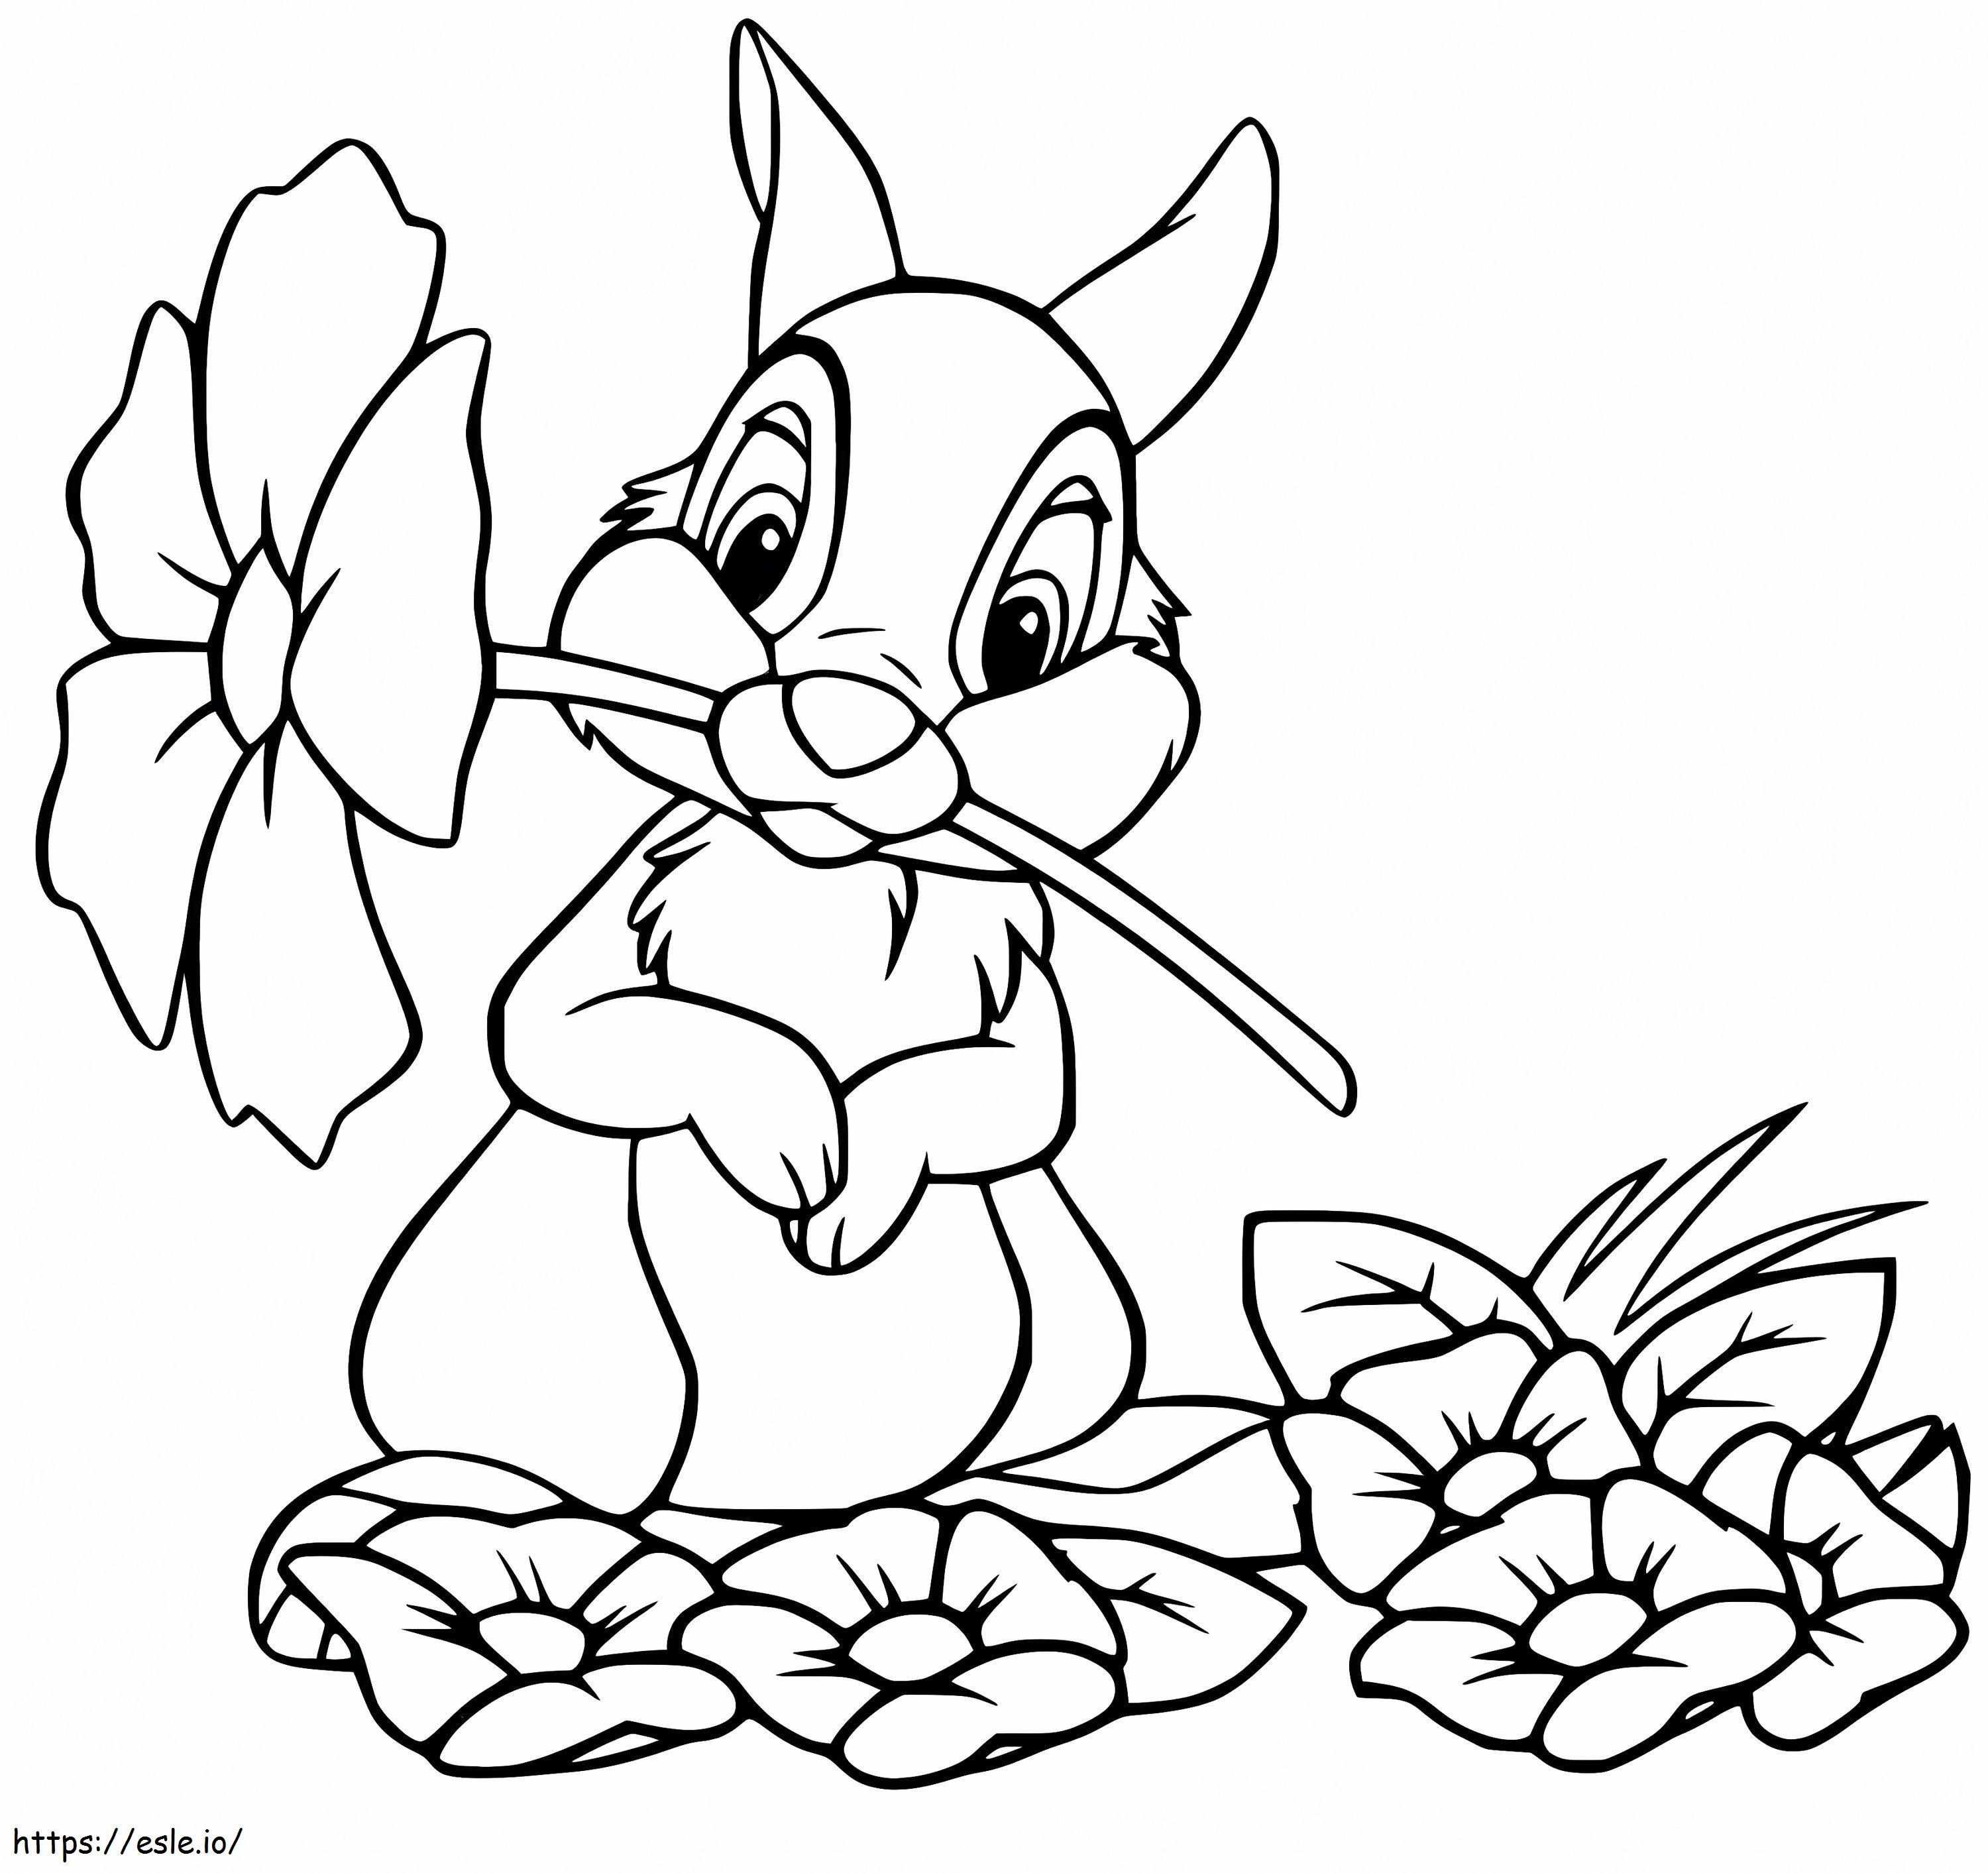 Thumper Holding A Flower coloring page